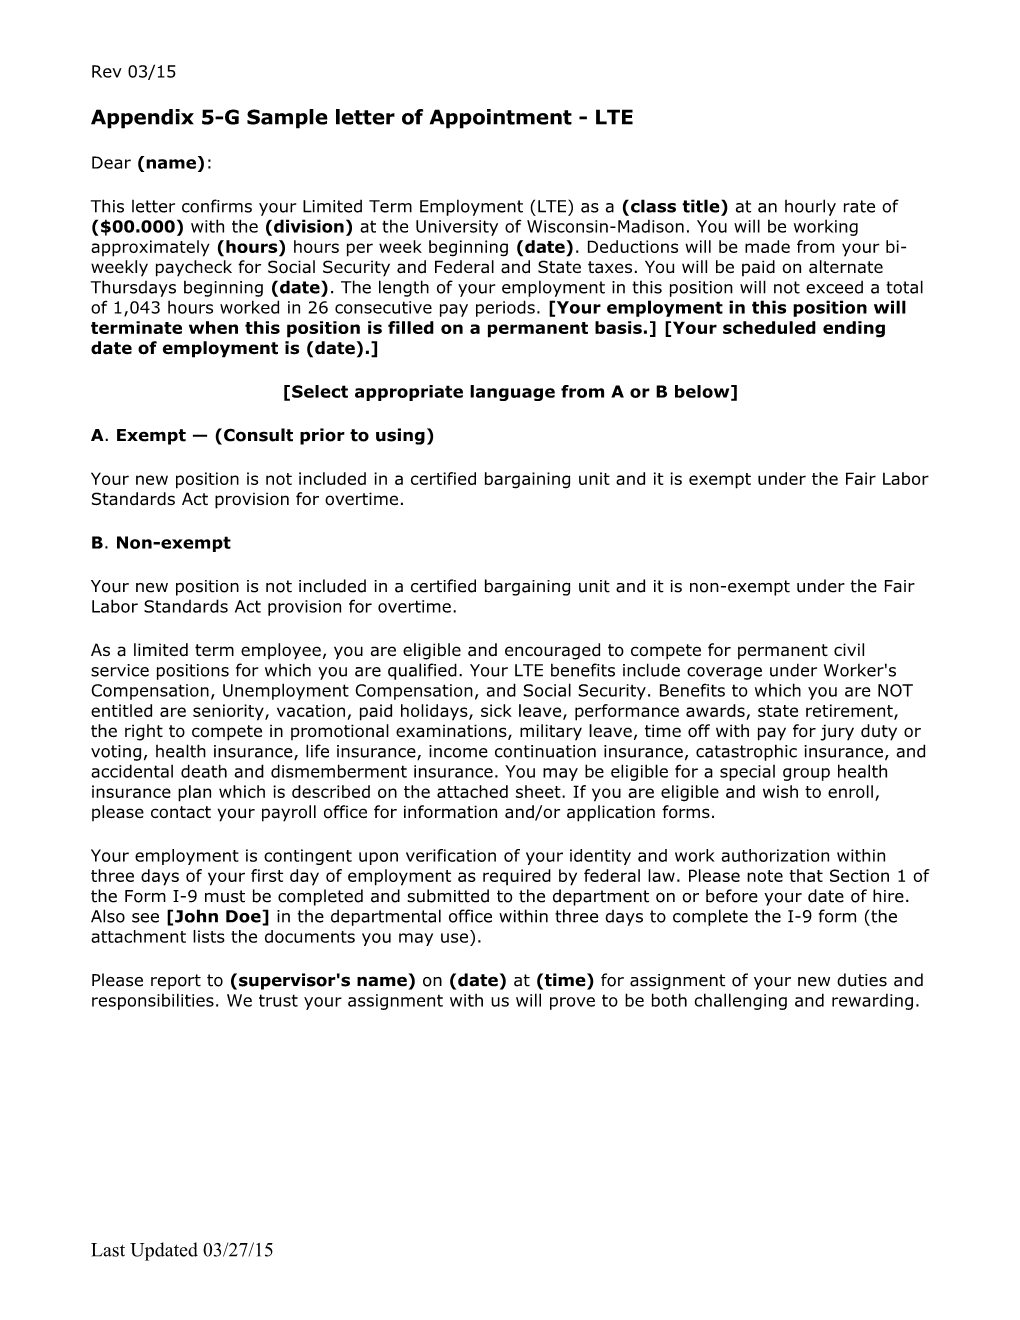 Appendix 5-Gsample Letter of Appointment - LTE